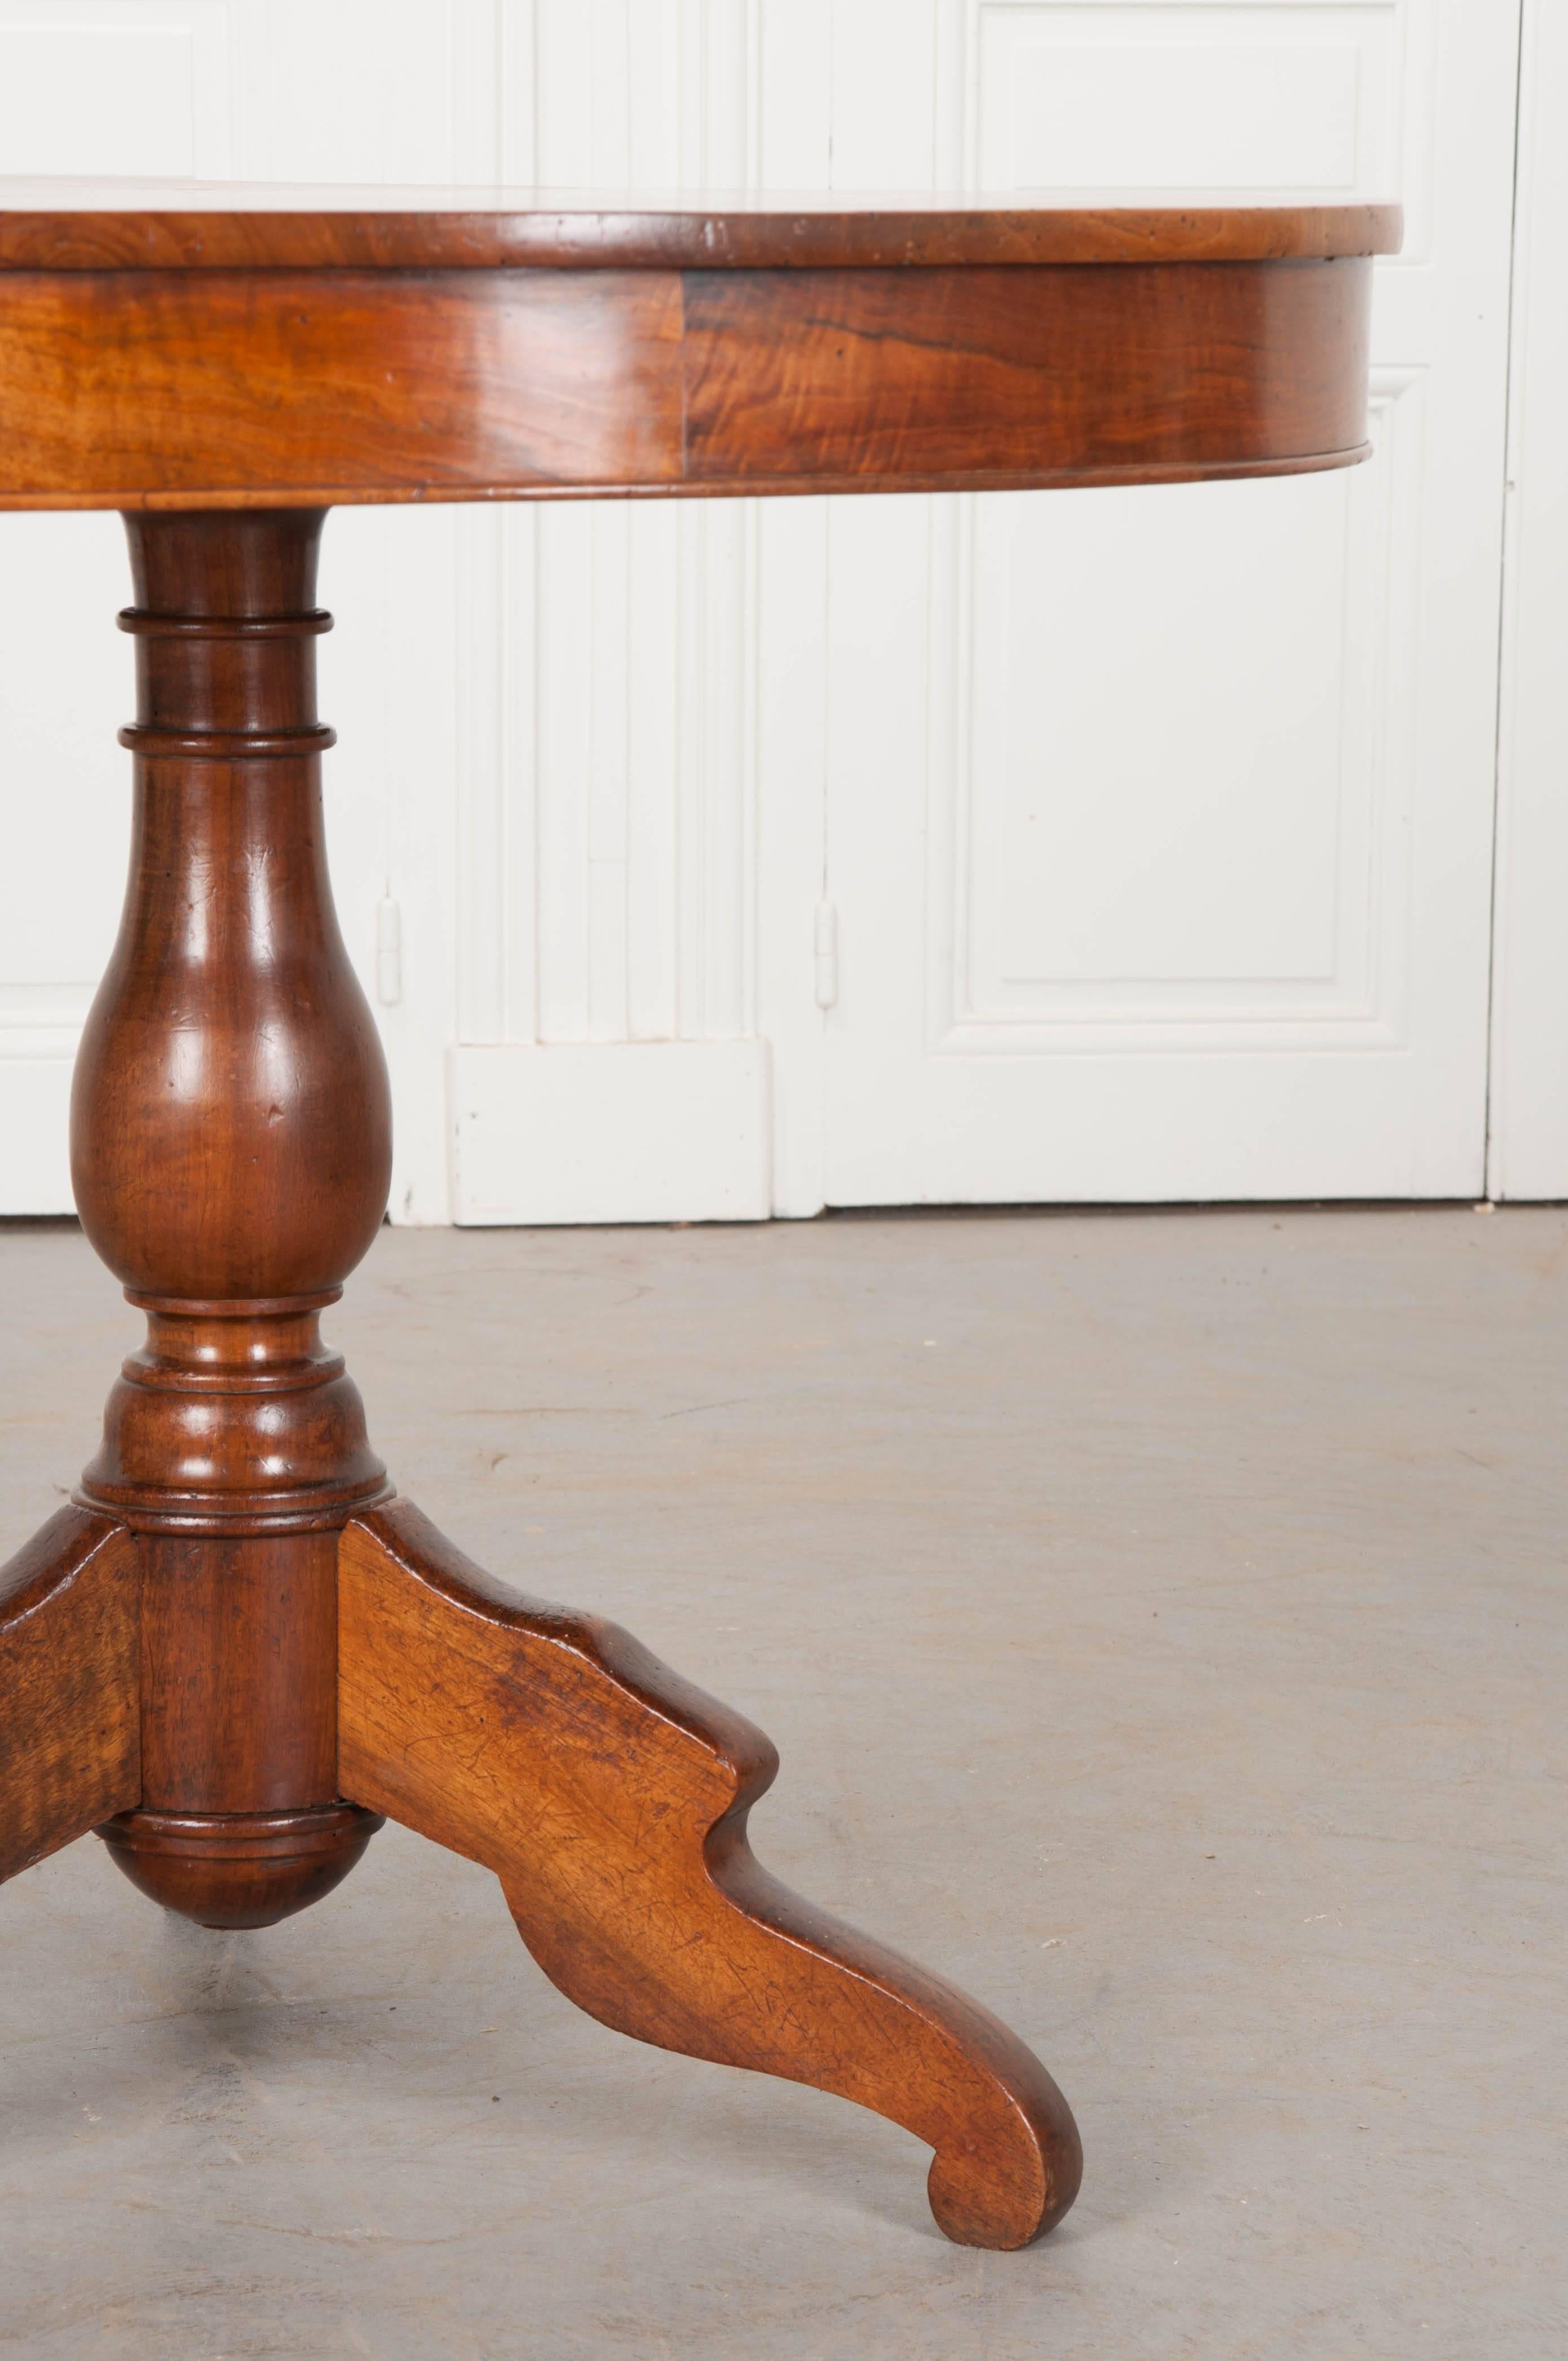 A beautiful round walnut centre table made in France in the 19th century. This exceptional antique table is perfect for a foyer or entryway. Piled with books and flower arrangements, a more welcoming sight cannot be envisioned. The round top has